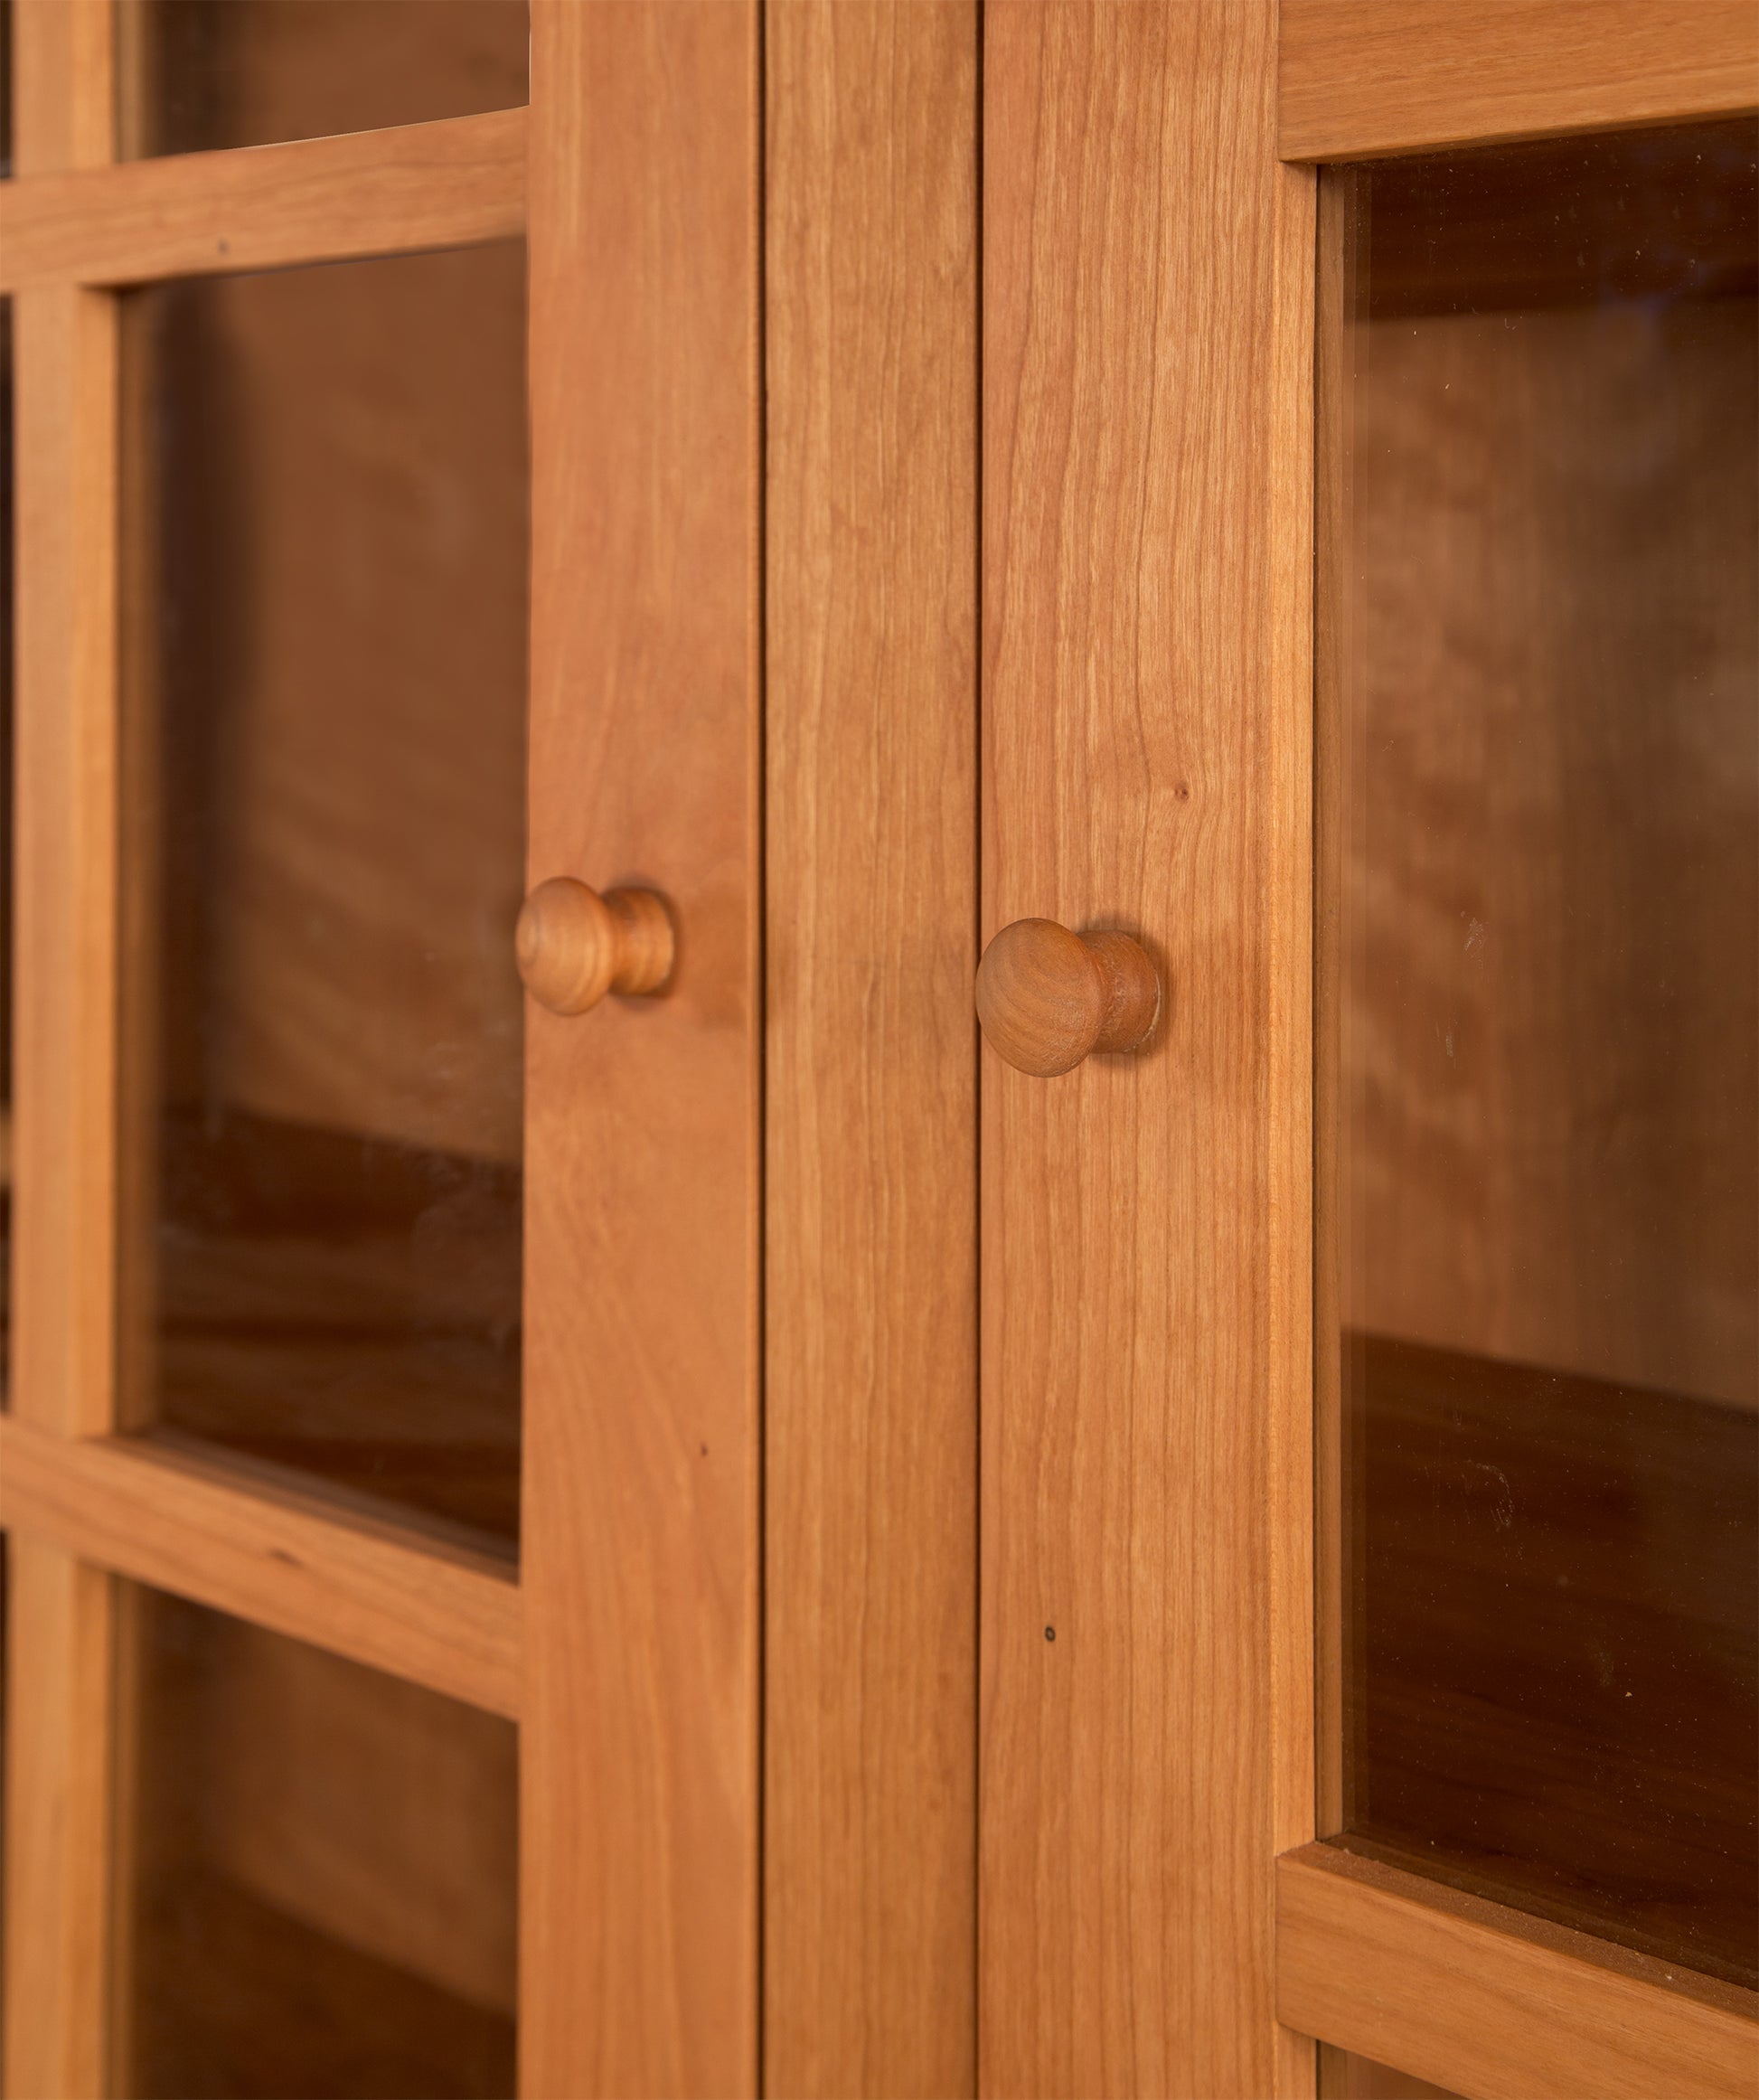 Wooden cabinet doors with round knobs, glass panels, and Heartwood Shaker Style from Vermont Furniture Designs.